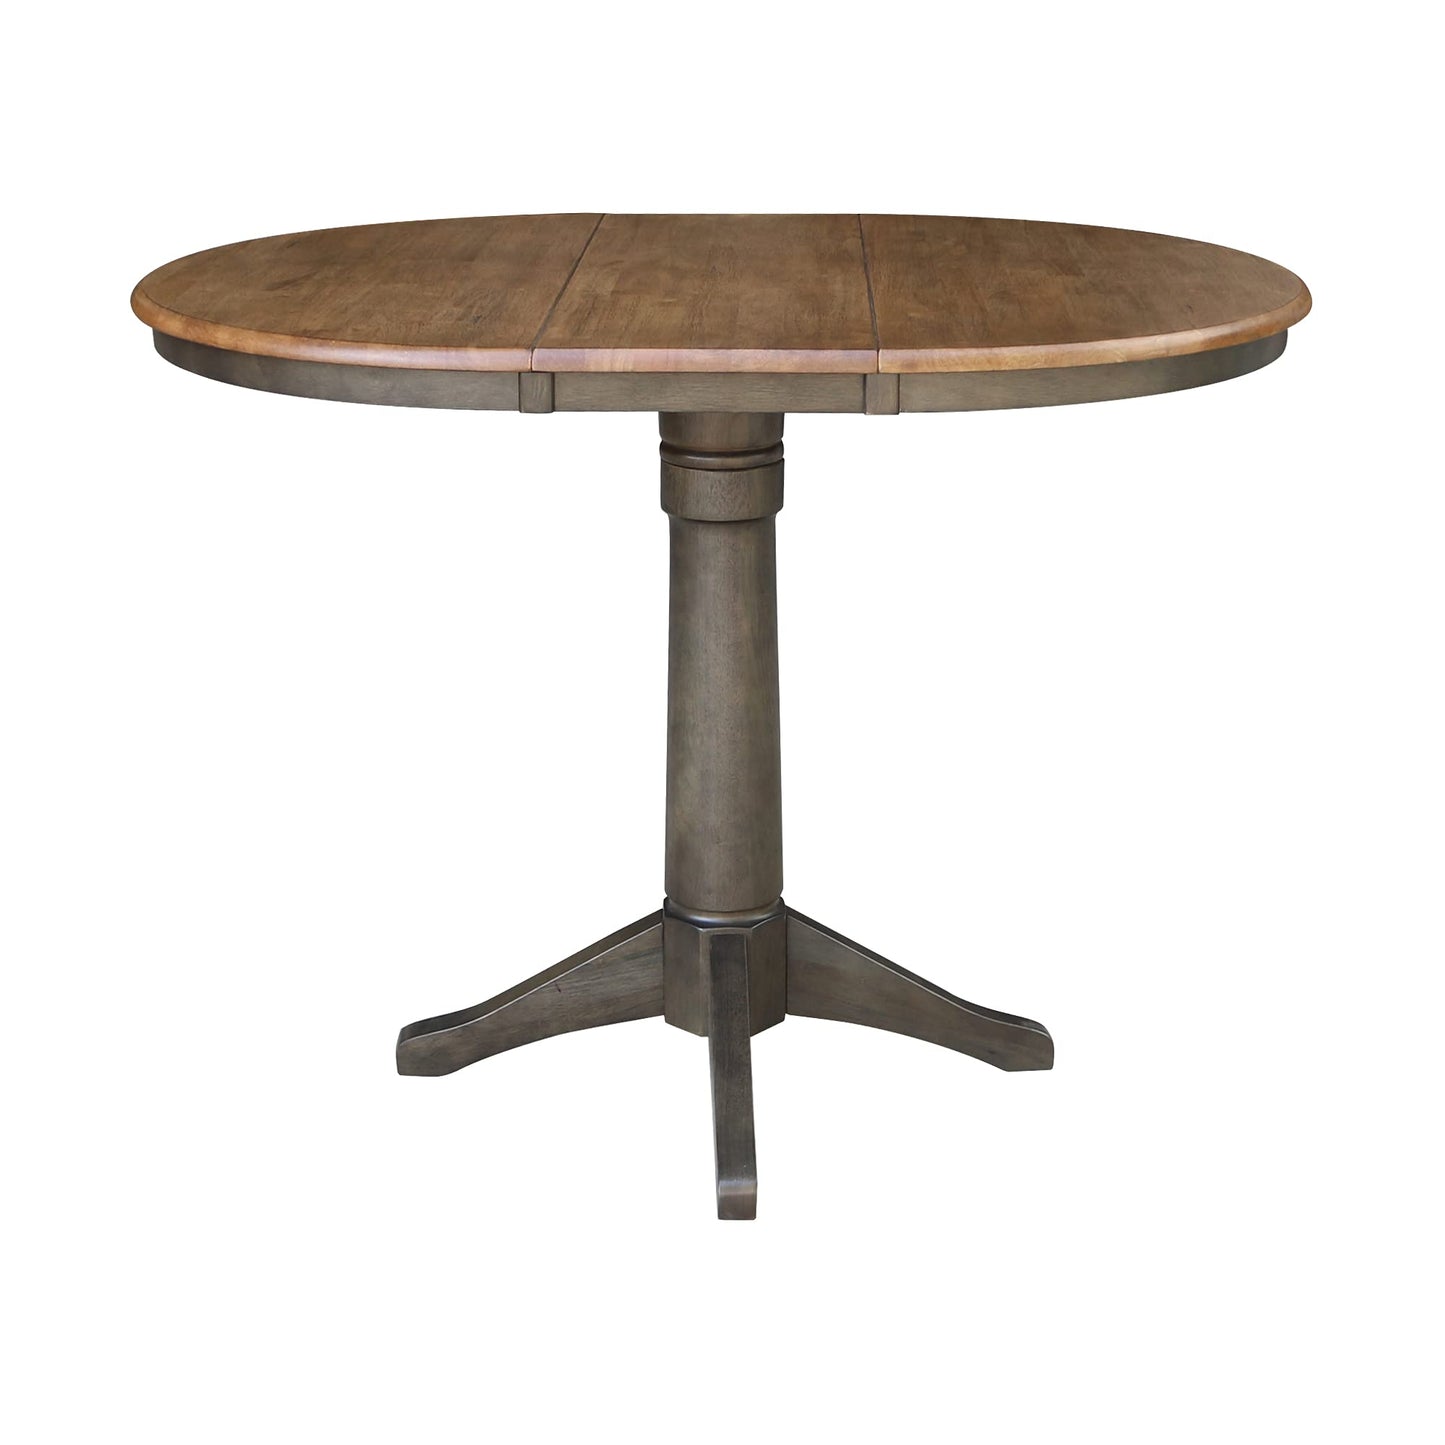 IC International Concepts 36" Round Top Pedestal 12" Leaf-36.1" H-Counter Height Dining Table, Hickory/Washed Coal